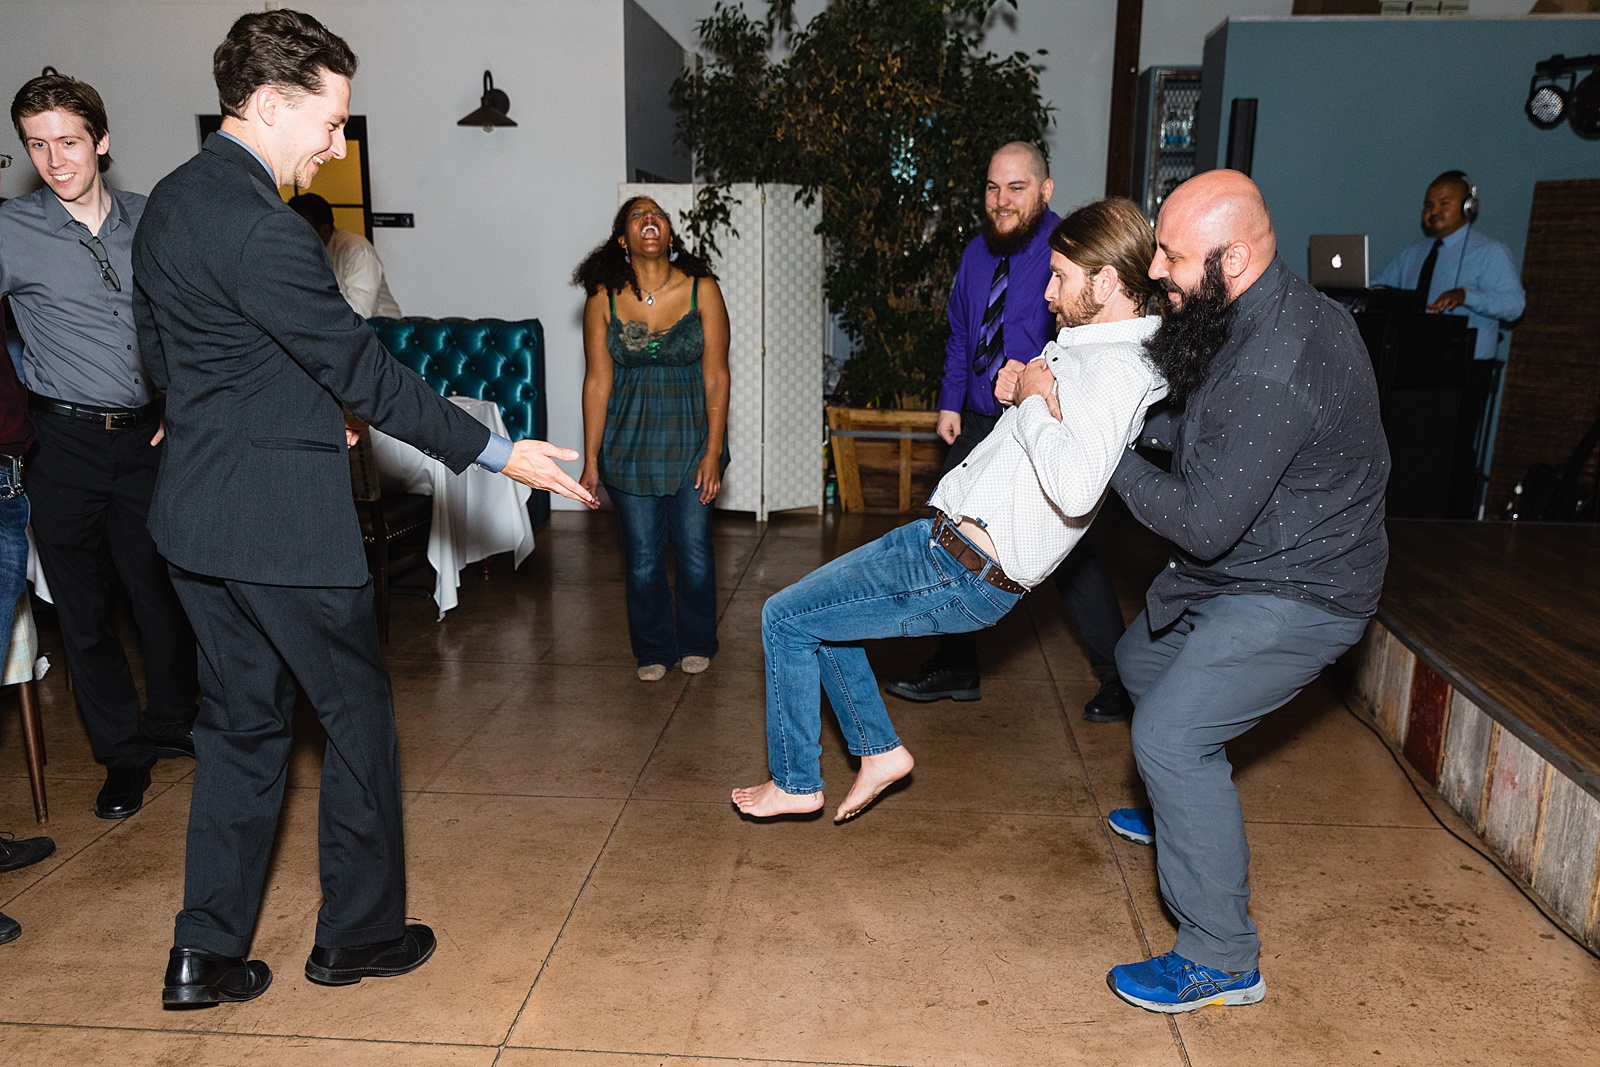 Guests dancing together at Hidden House wedding reception by Chandler wedding photographer PMA Photography